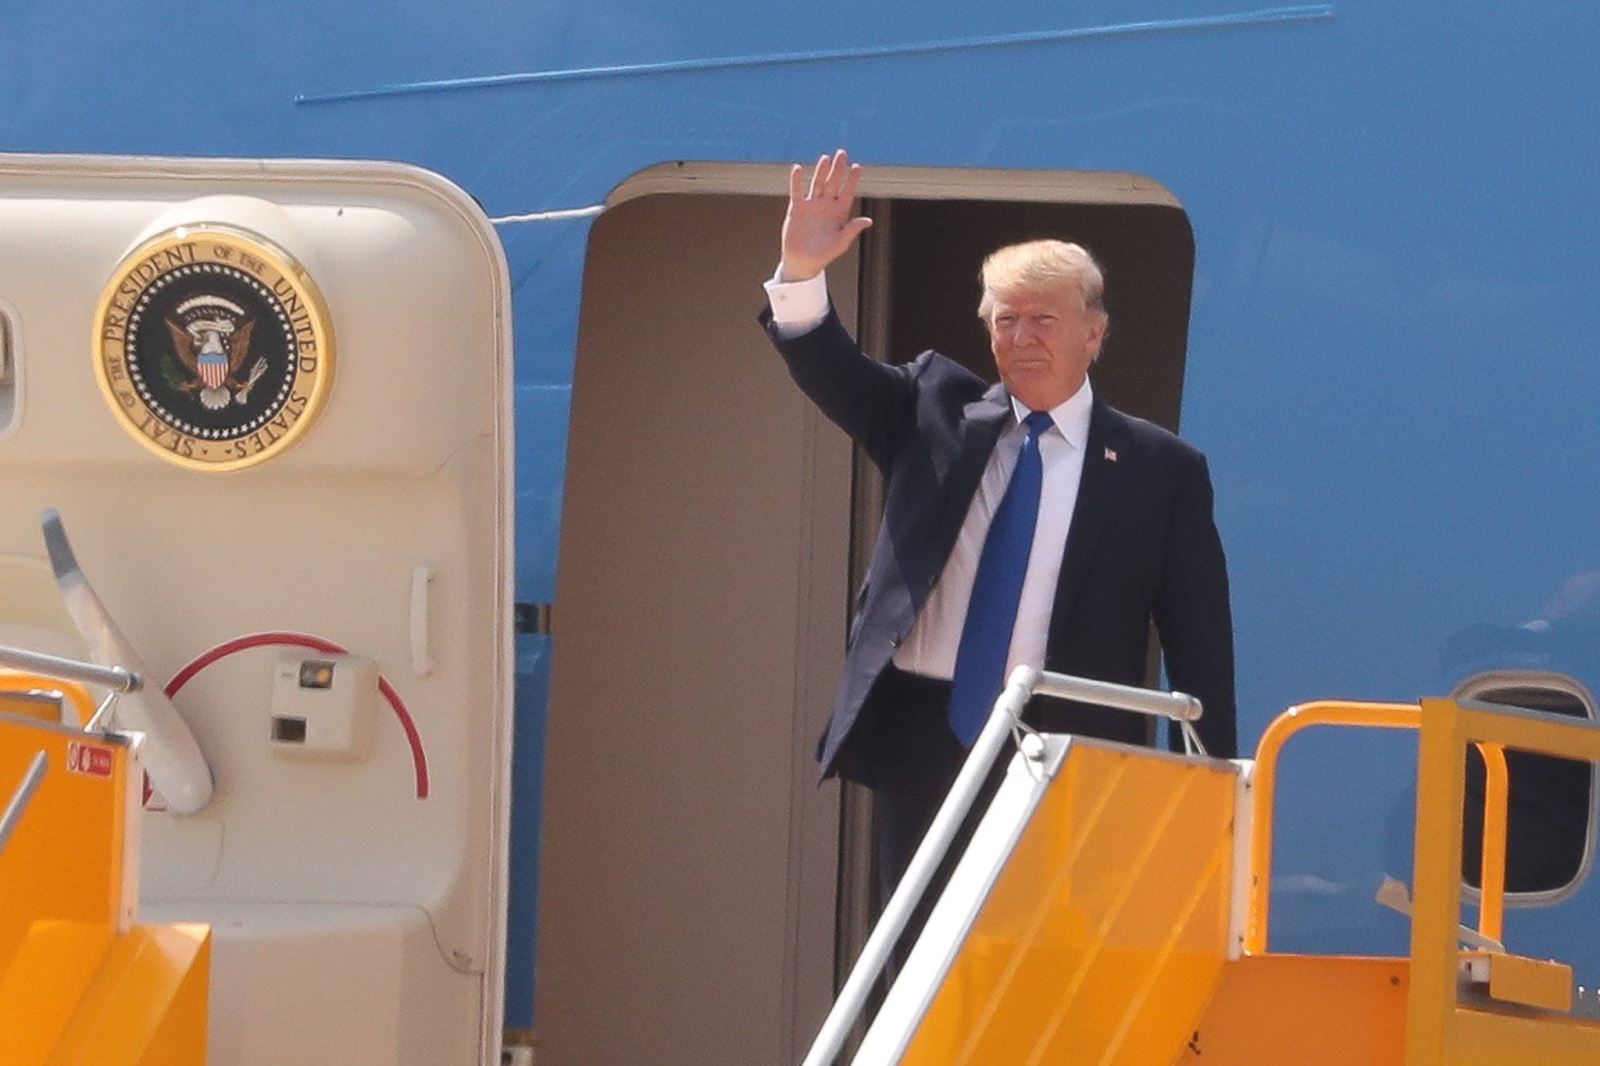 Chinese, US and Russian presidents arrive in Da Nang for APEC Summit